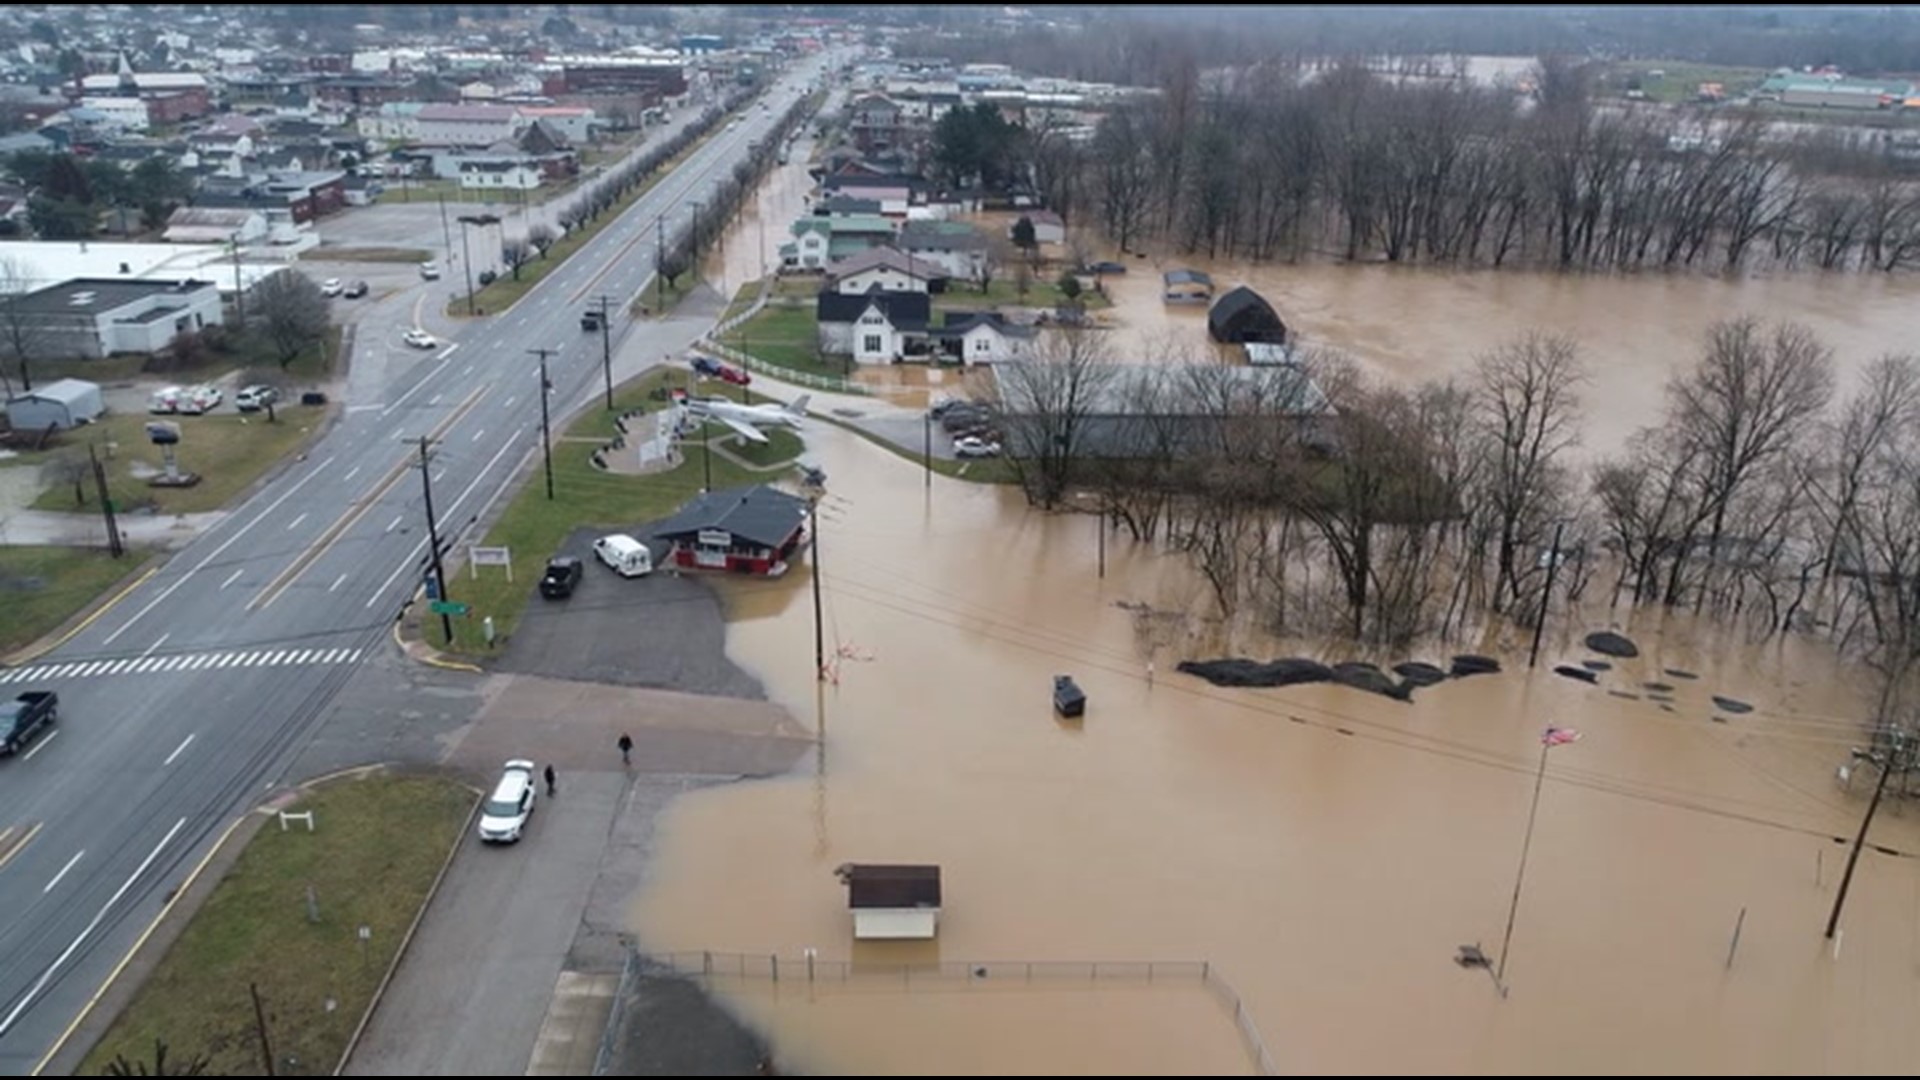 Heavy rain across the Southeast from the end of February into the start of March led to rapidly rising rivers in parts of West Virginia, submerging homes, roads and vehicles.